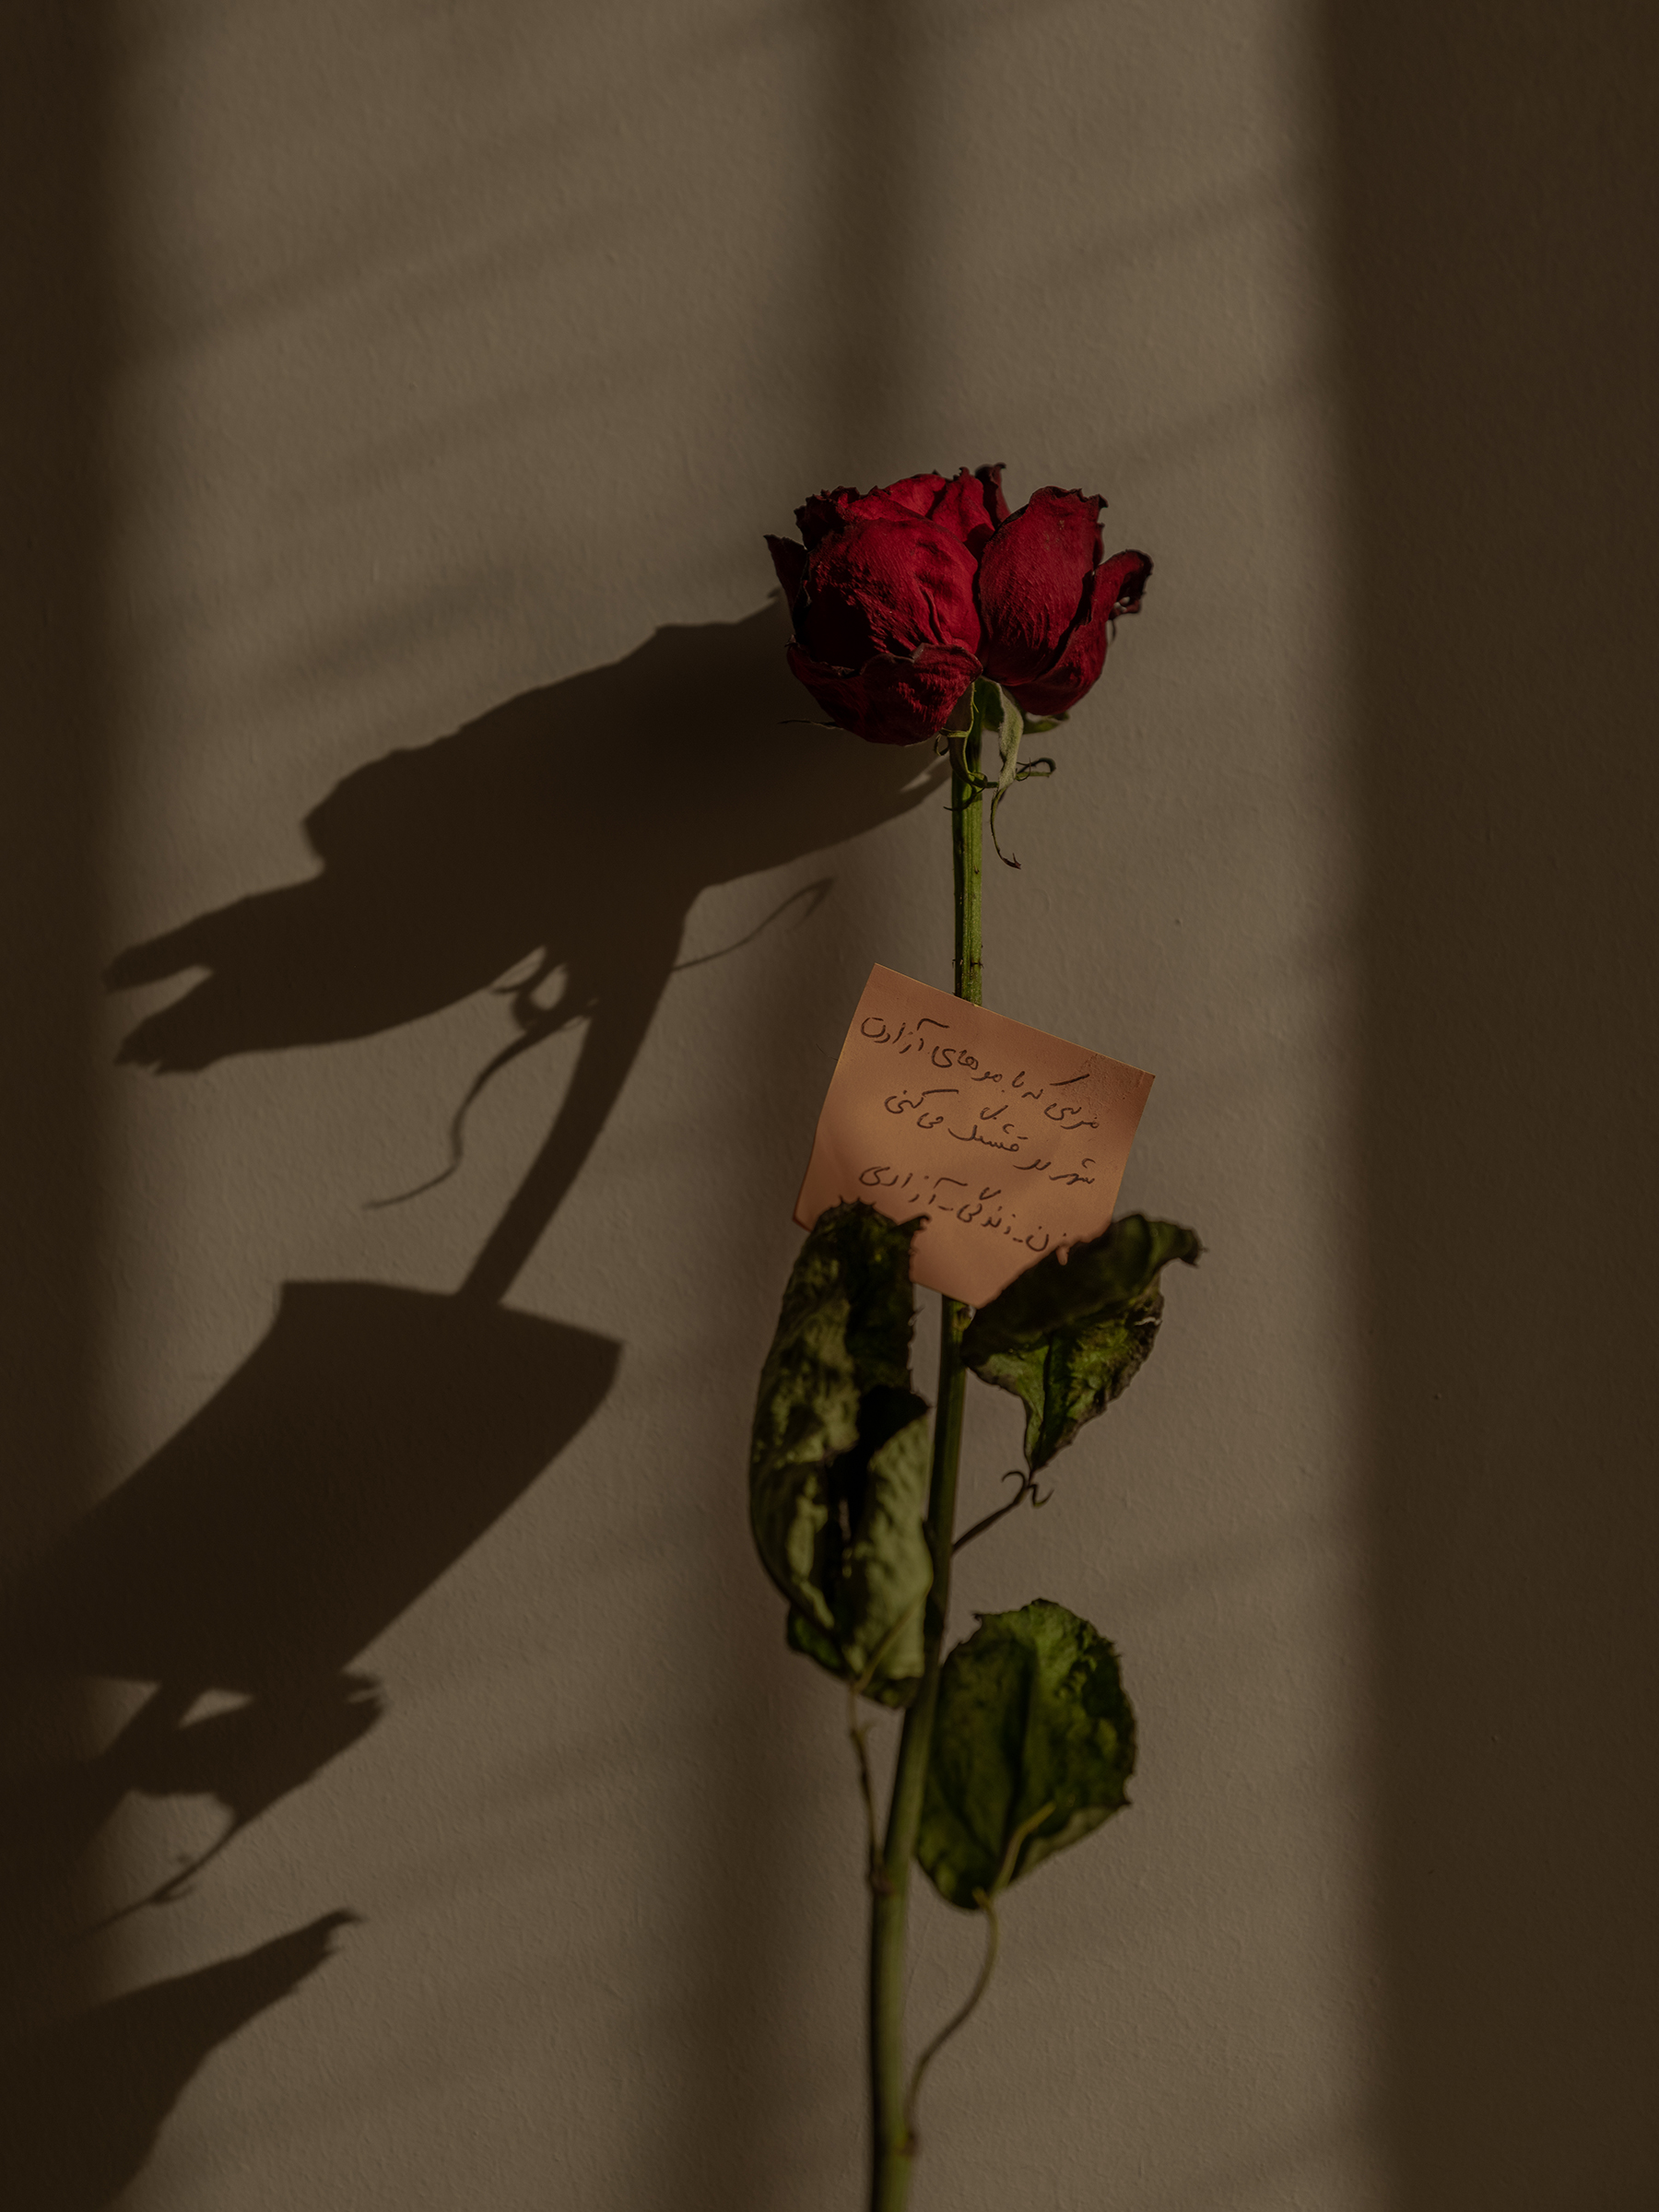 Asma*, 25, took off her hijab one day in Tehran and received a flower and note that read, "Thank you for making the city more beautiful with your free hair." Many women in Iran hand out flowers, chocolates, or kind notes in solidarity with these acts of protest. (Forough Alaei for TIME)